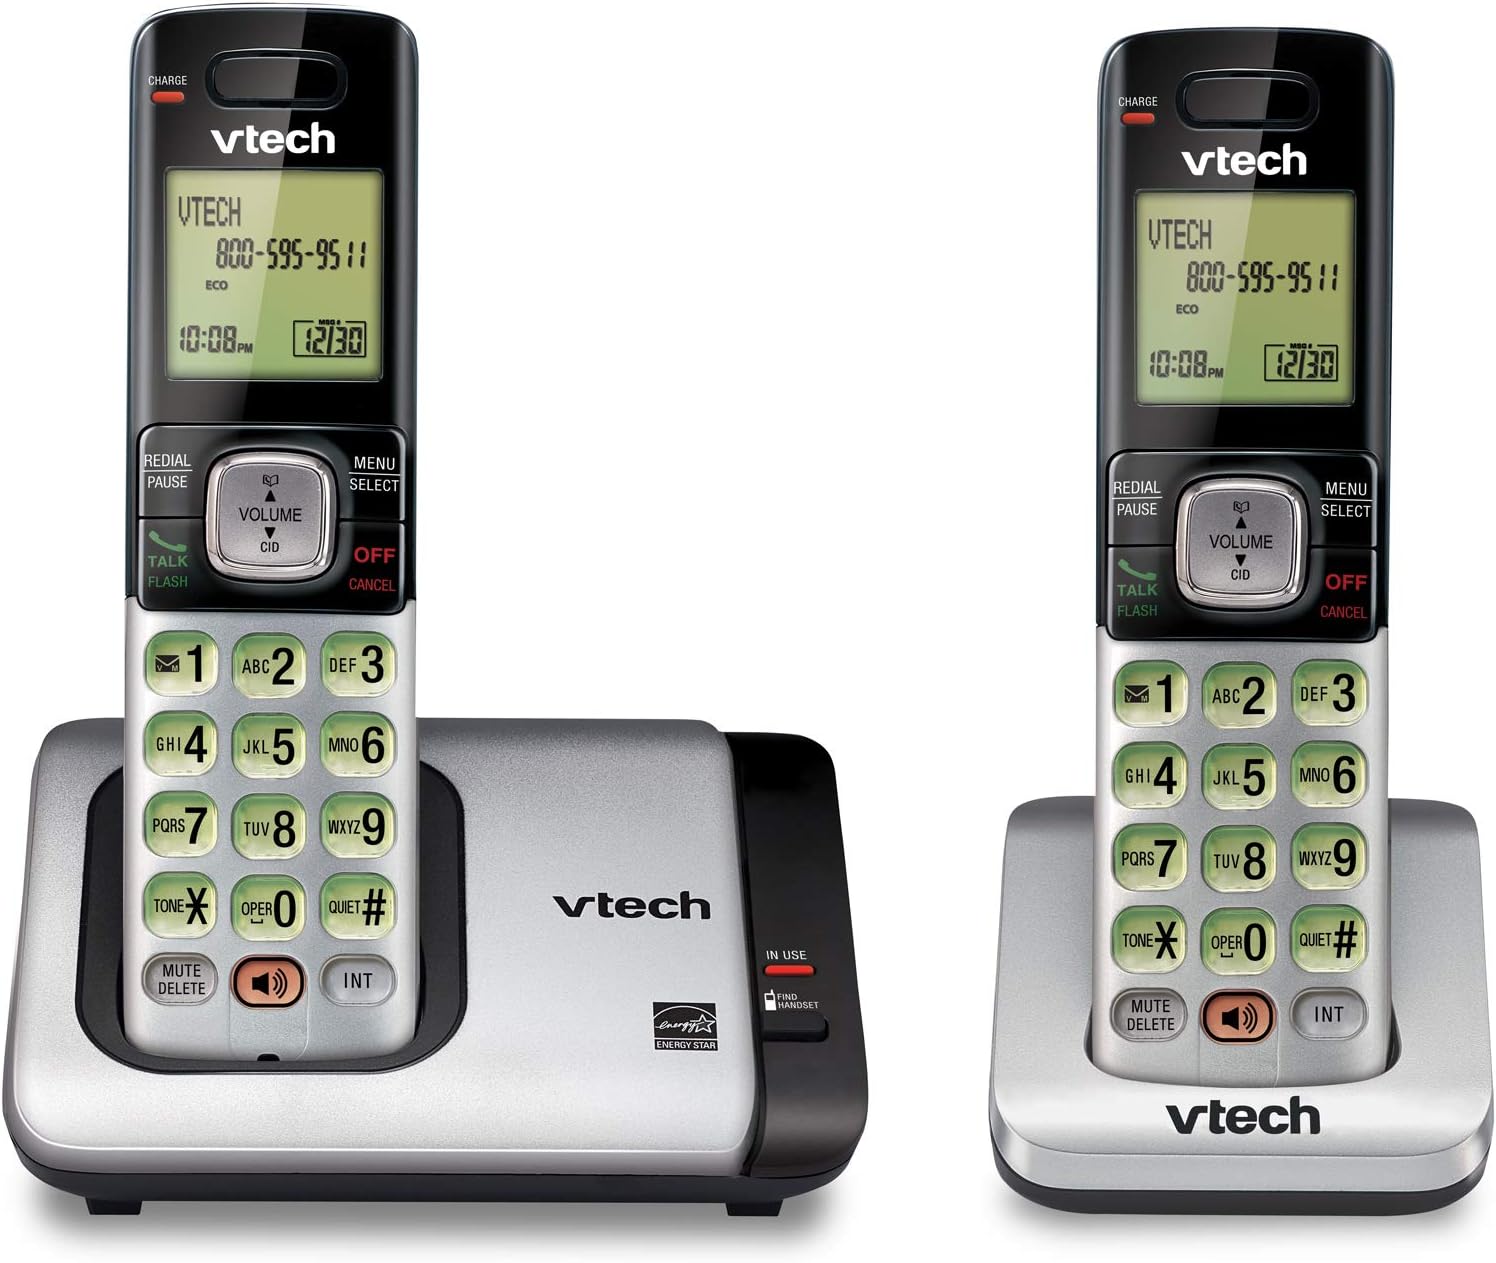 cordless phone brand detailed review